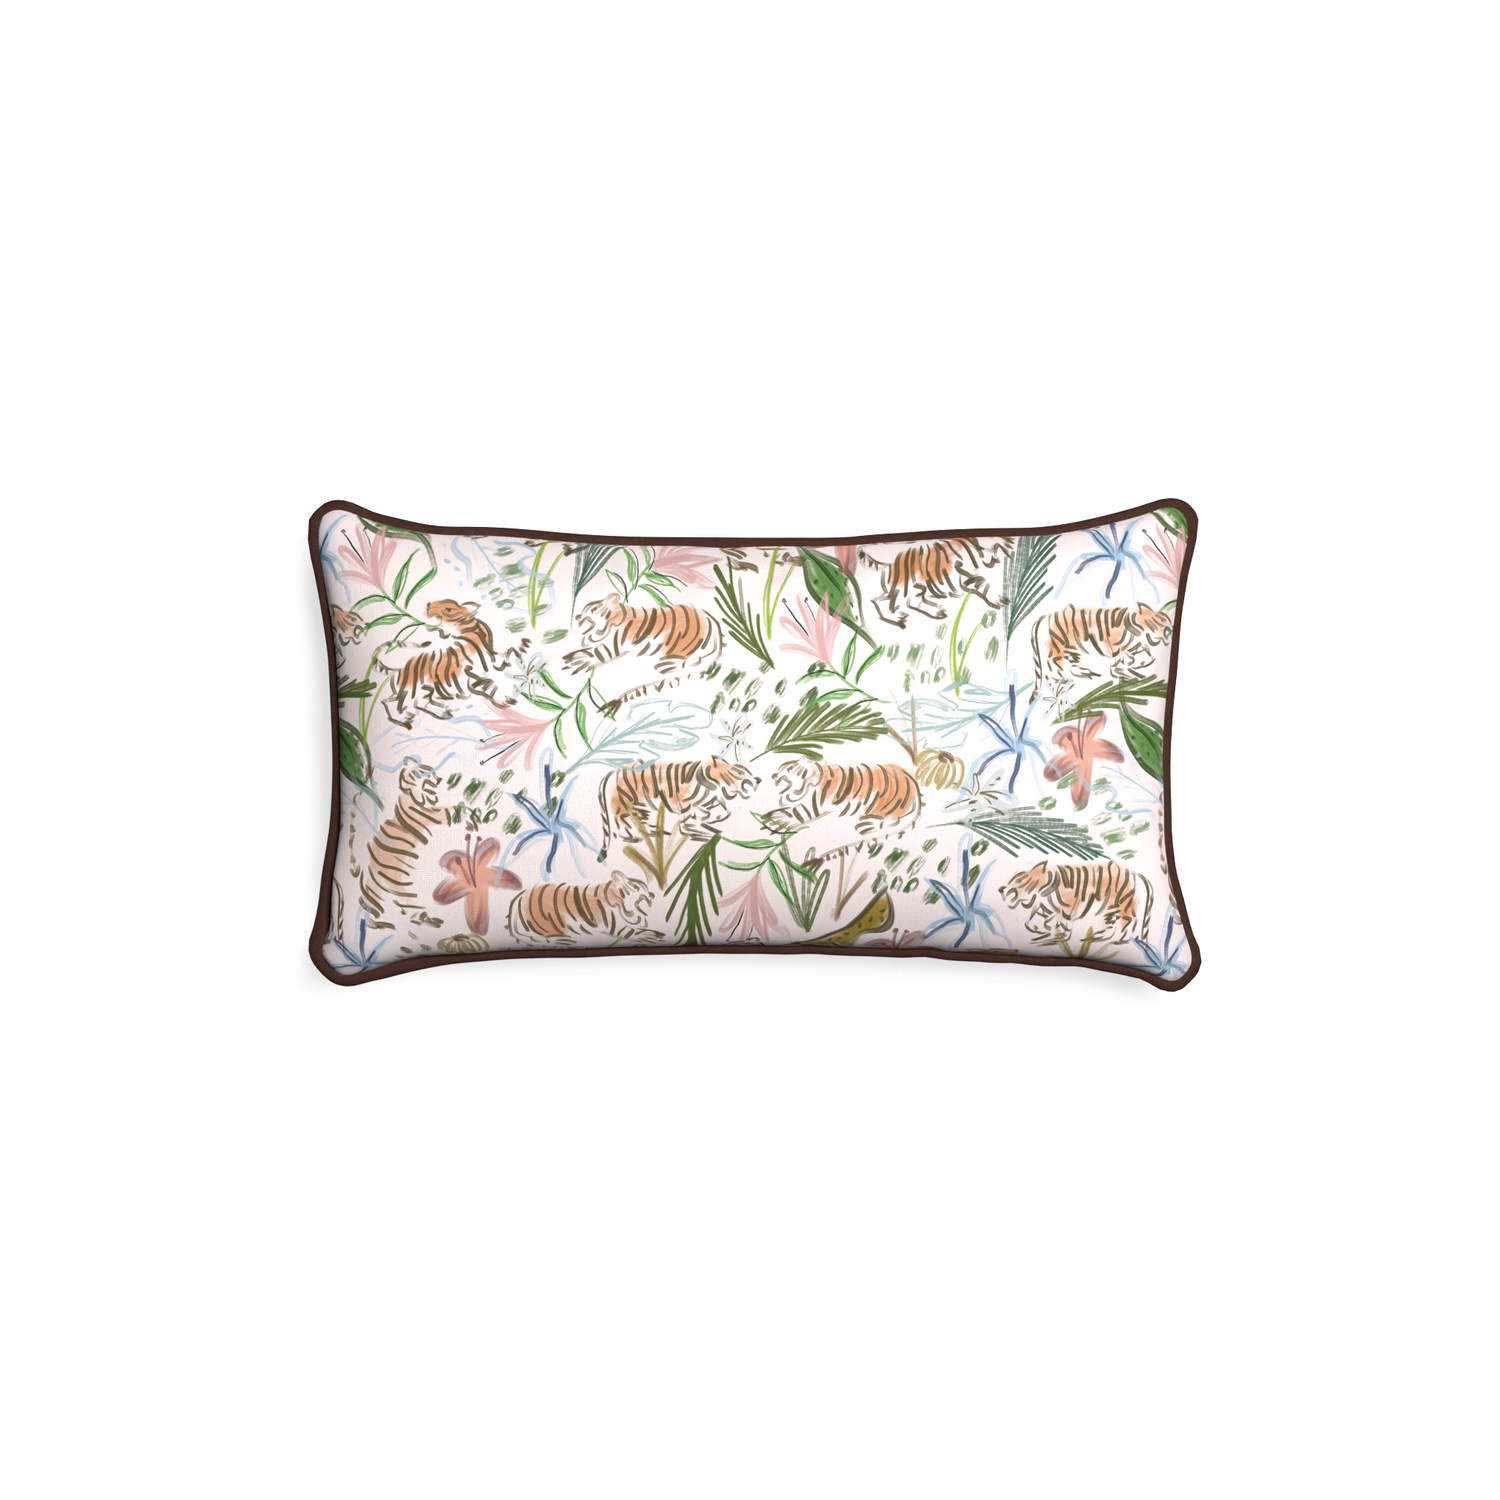 Petite-lumbar frida pink custom pink chinoiserie tigerpillow with w piping on white background